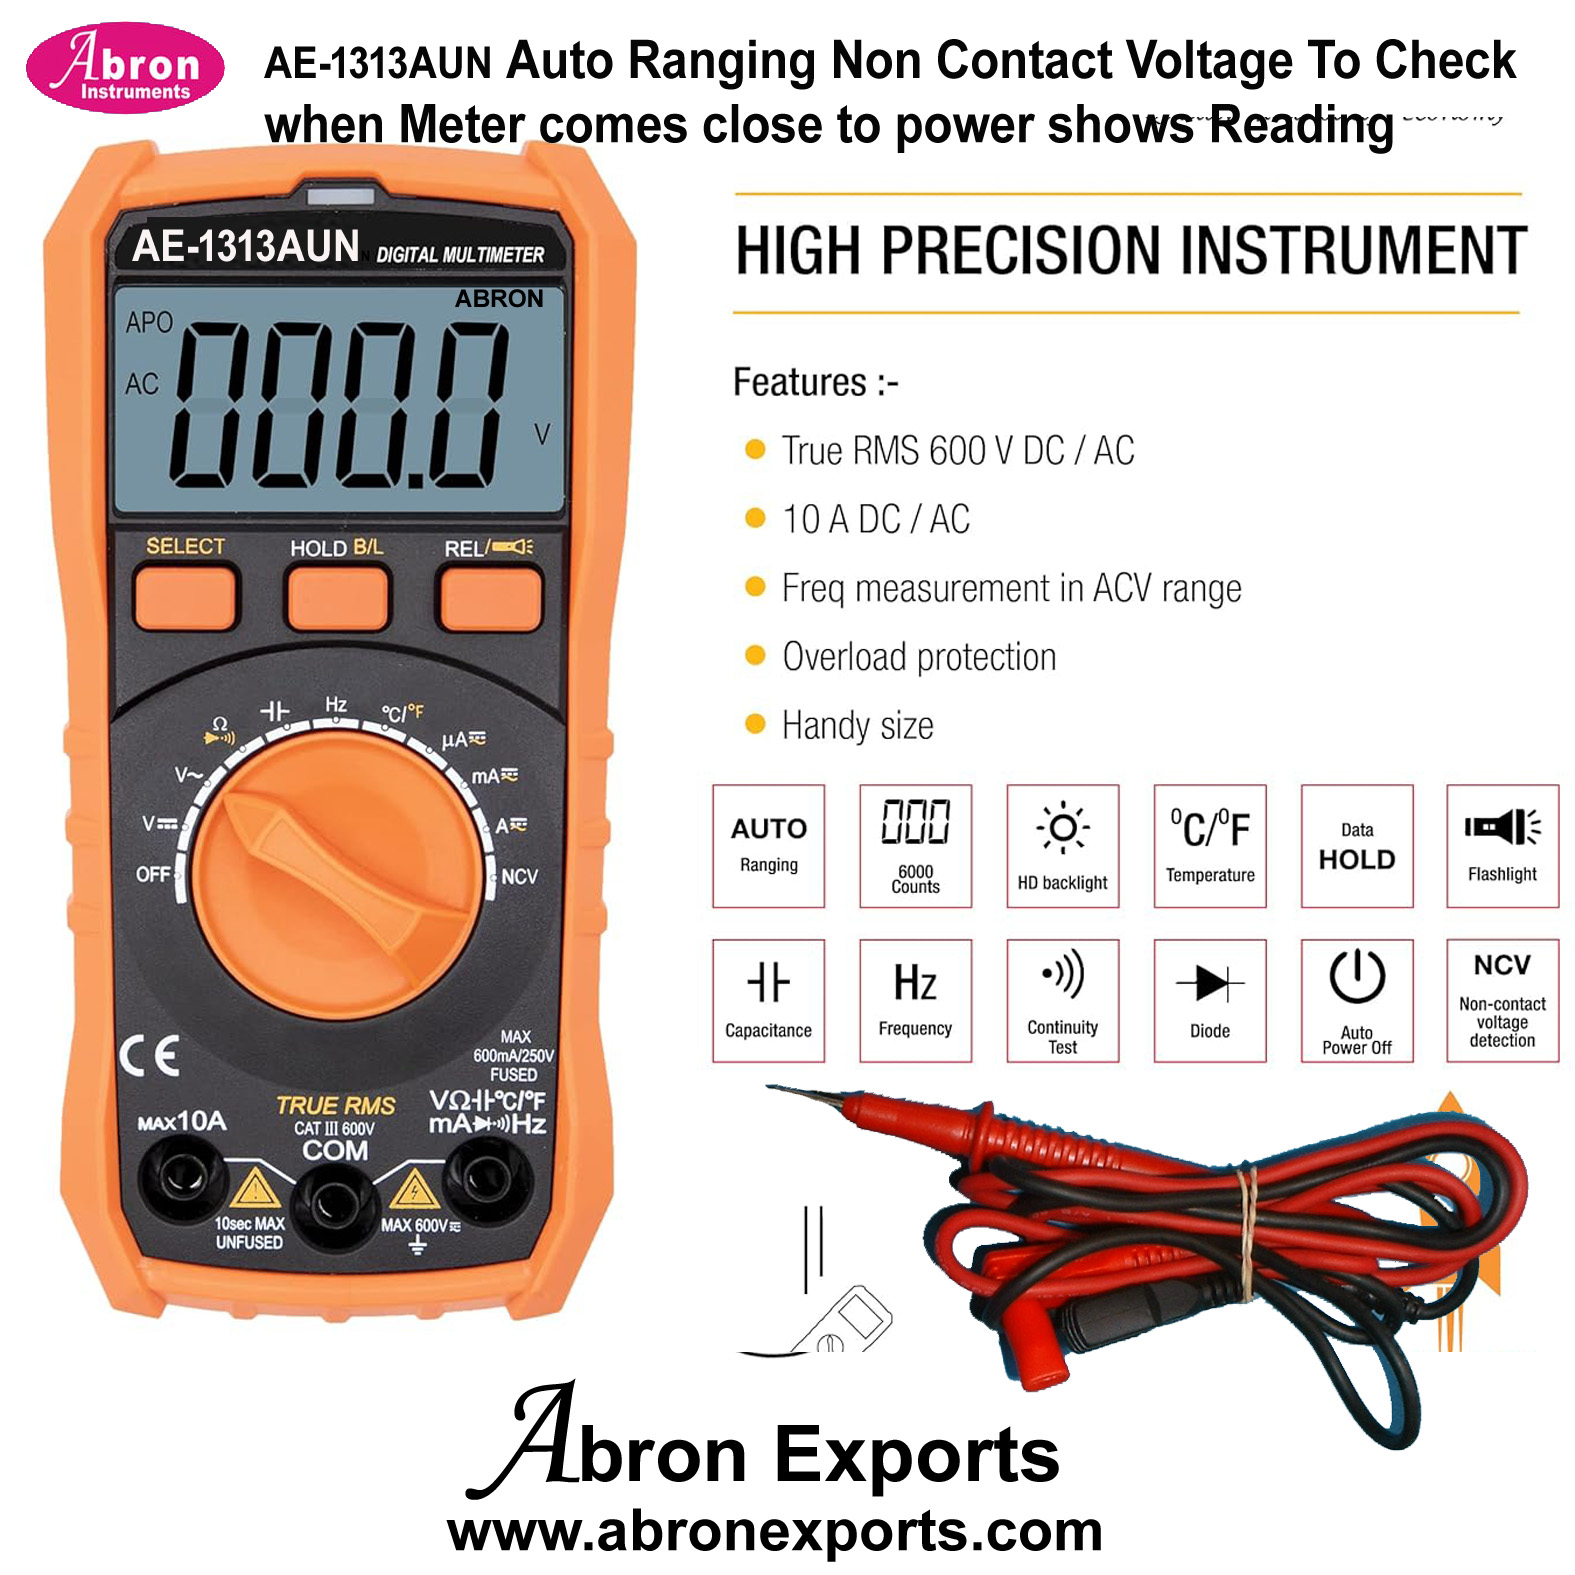 Digital multimeter Auto ranging Non contact Voltage Test True RMS 6000 Counts 600V ACDC 10A ACDC, Resistance Frequency Continuity Capacitance Temperature tests Abron AE-1313AUN 